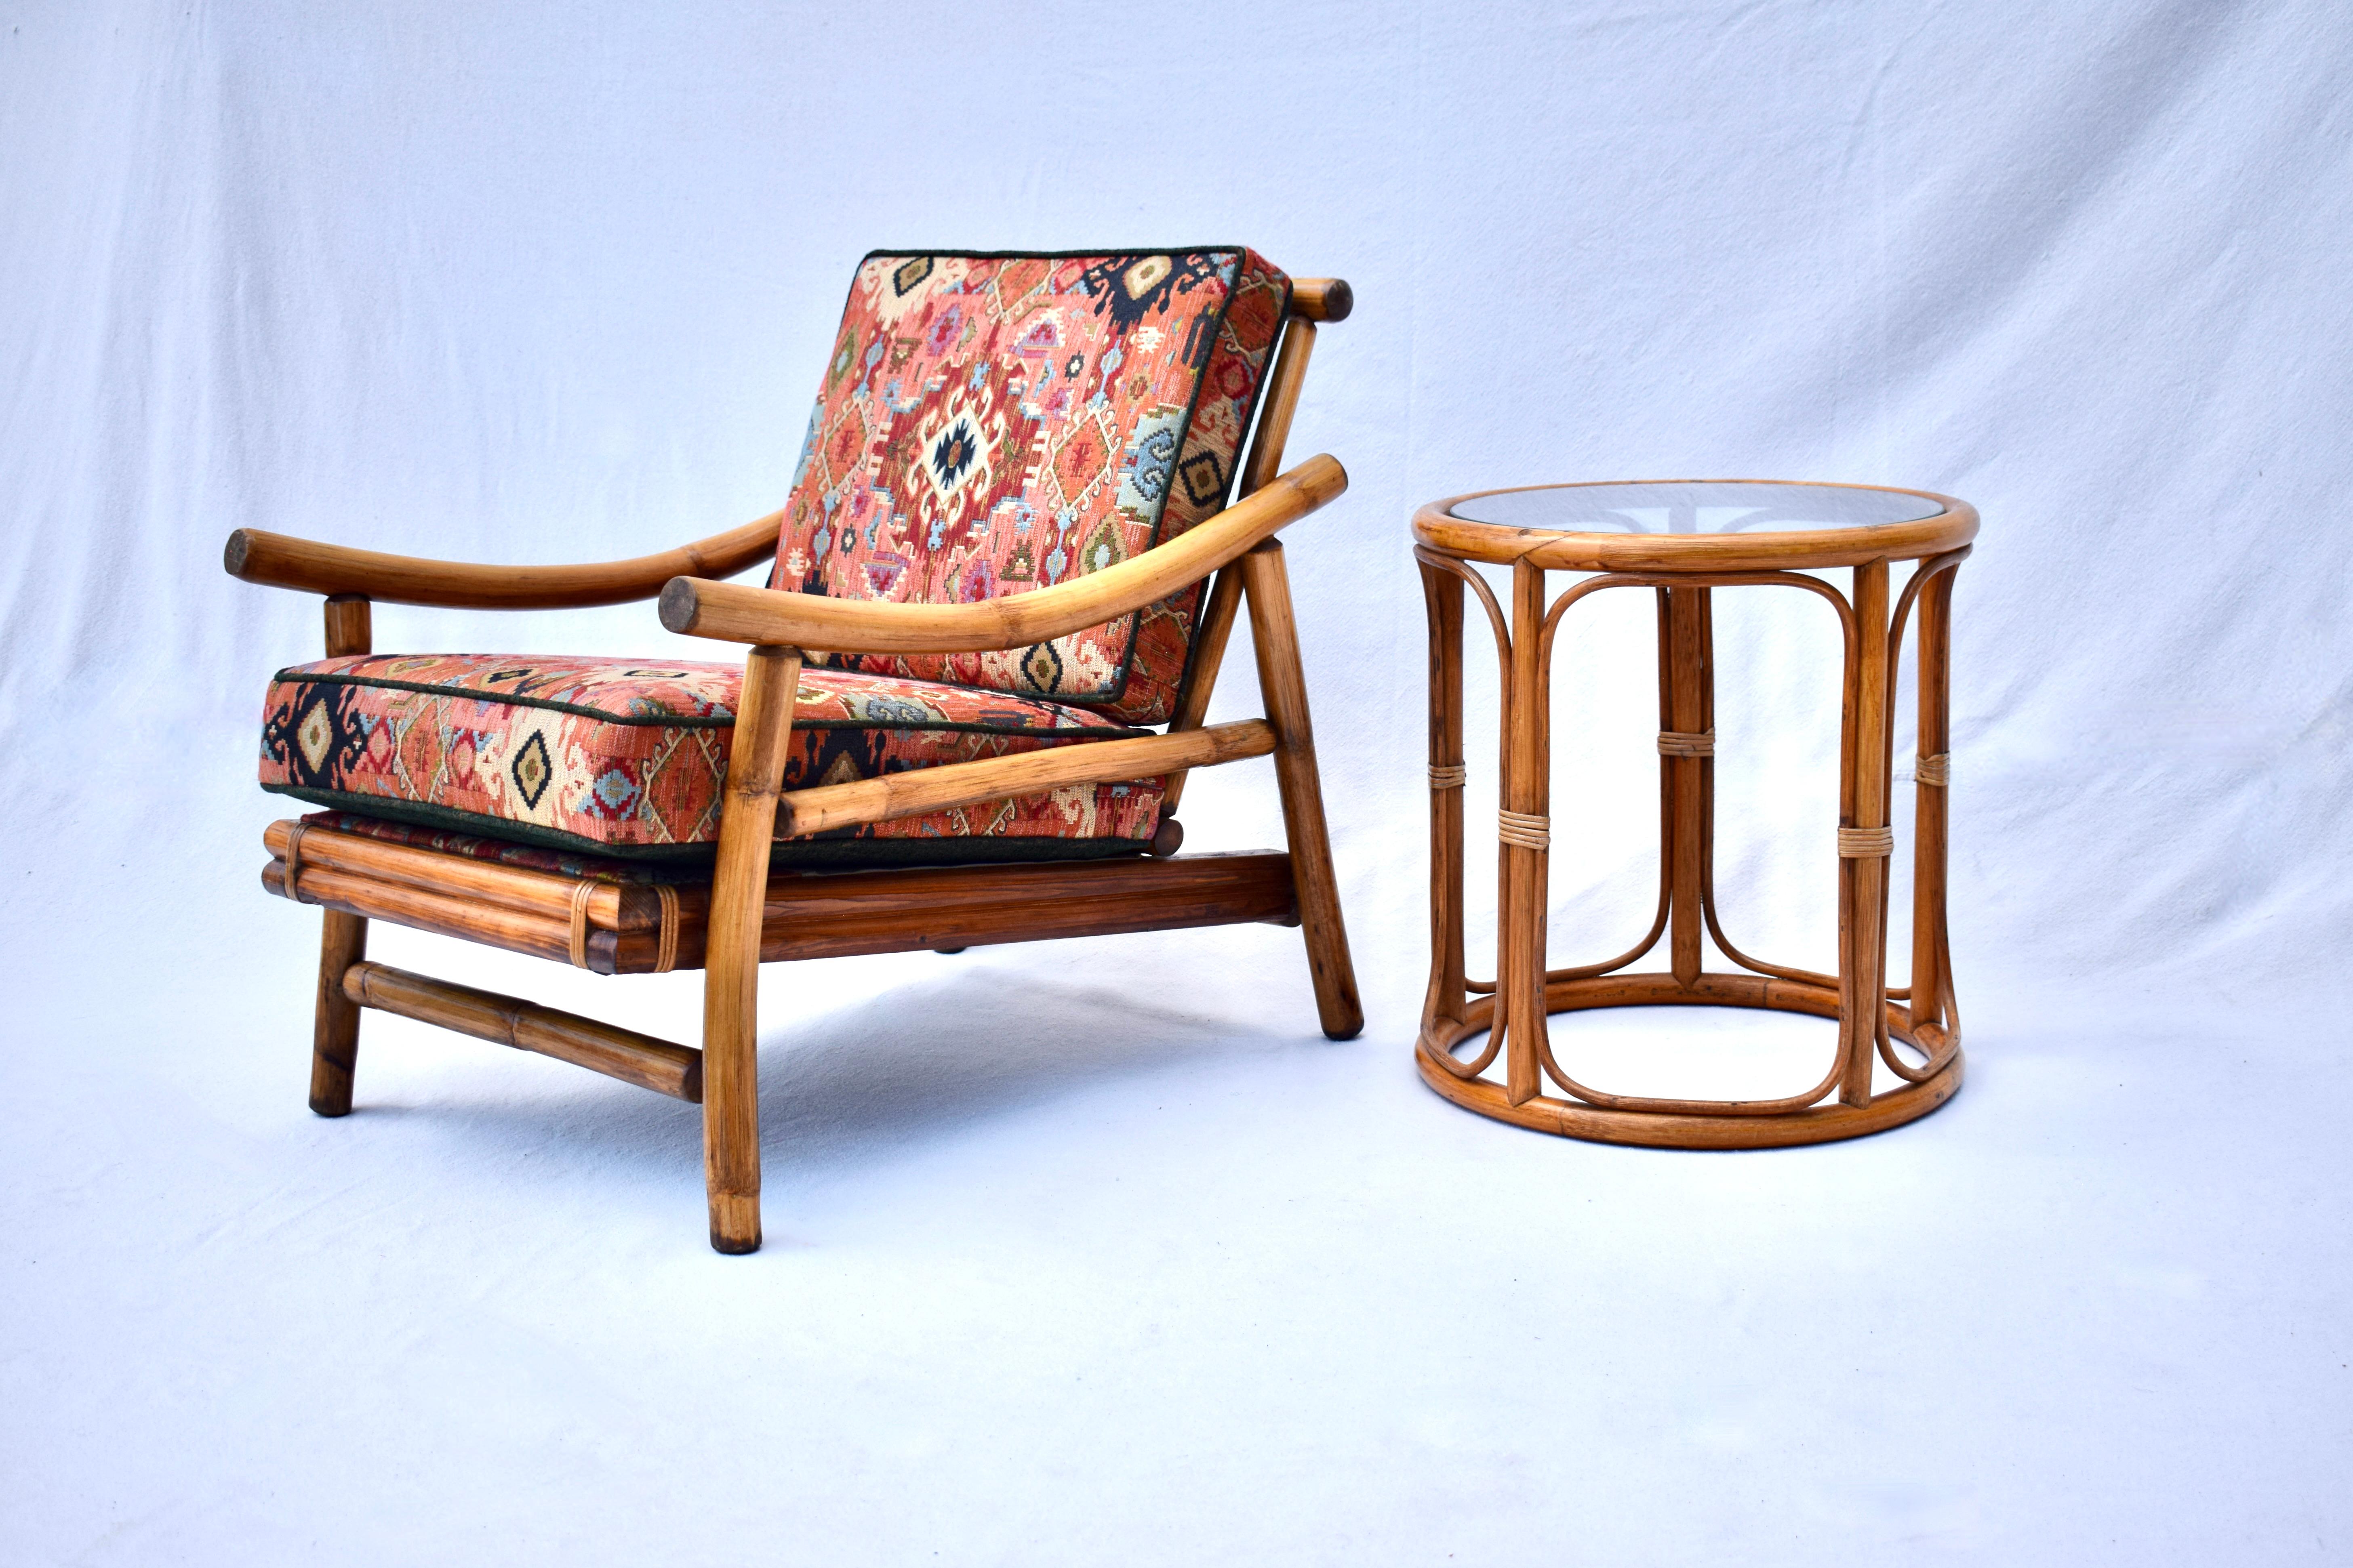 Upholstery Ficks Reed Pagoda Rattan Chairs & Table Set For Sale